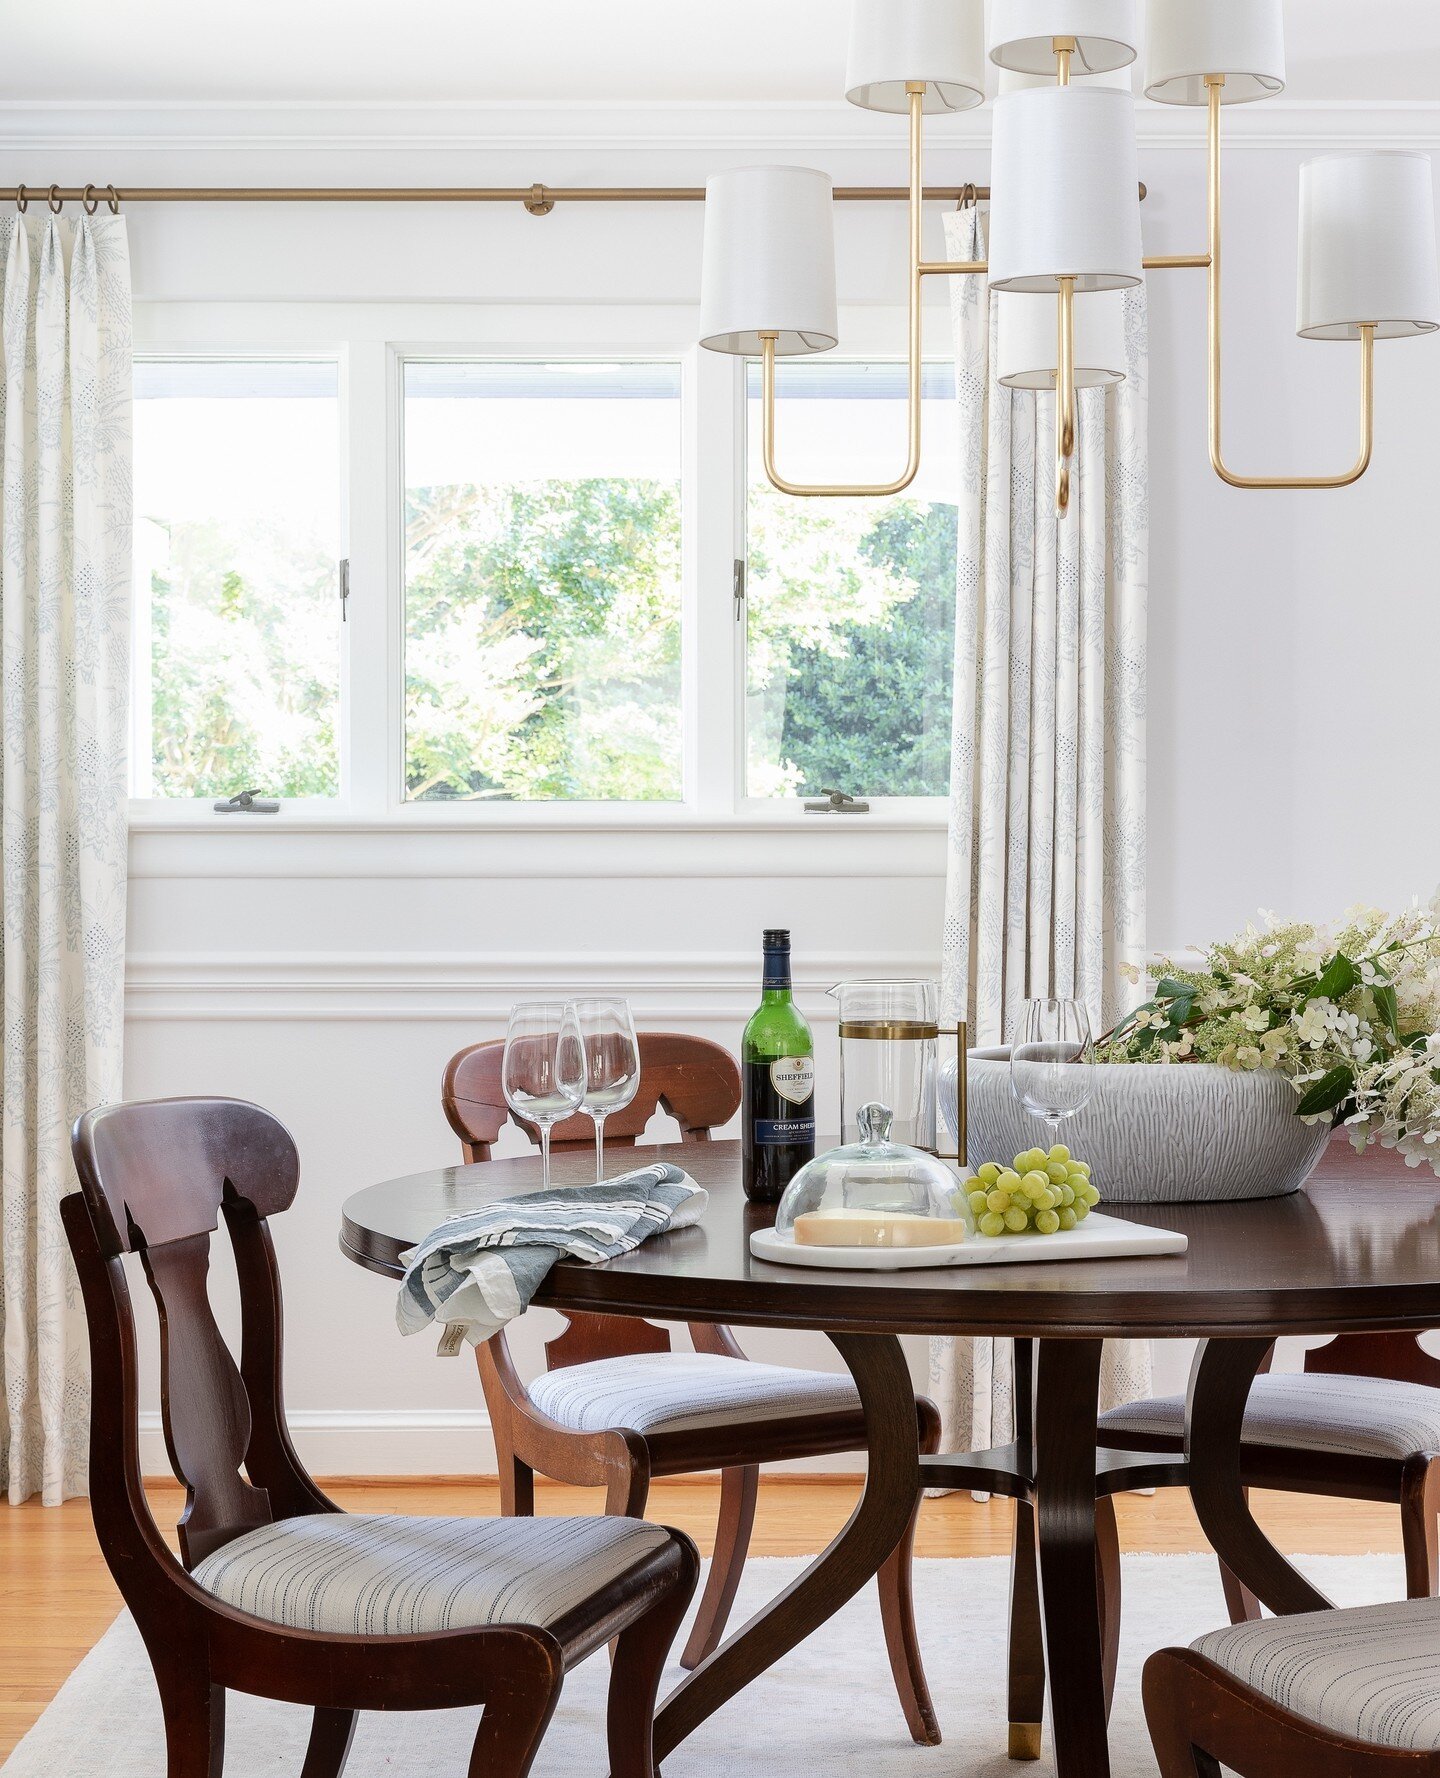 A vintage dining table and chair set gets new life with a modern chandelier.⁠
⁠
Photographer @christykosnicphotography⁠
Designer @chouxdesigns